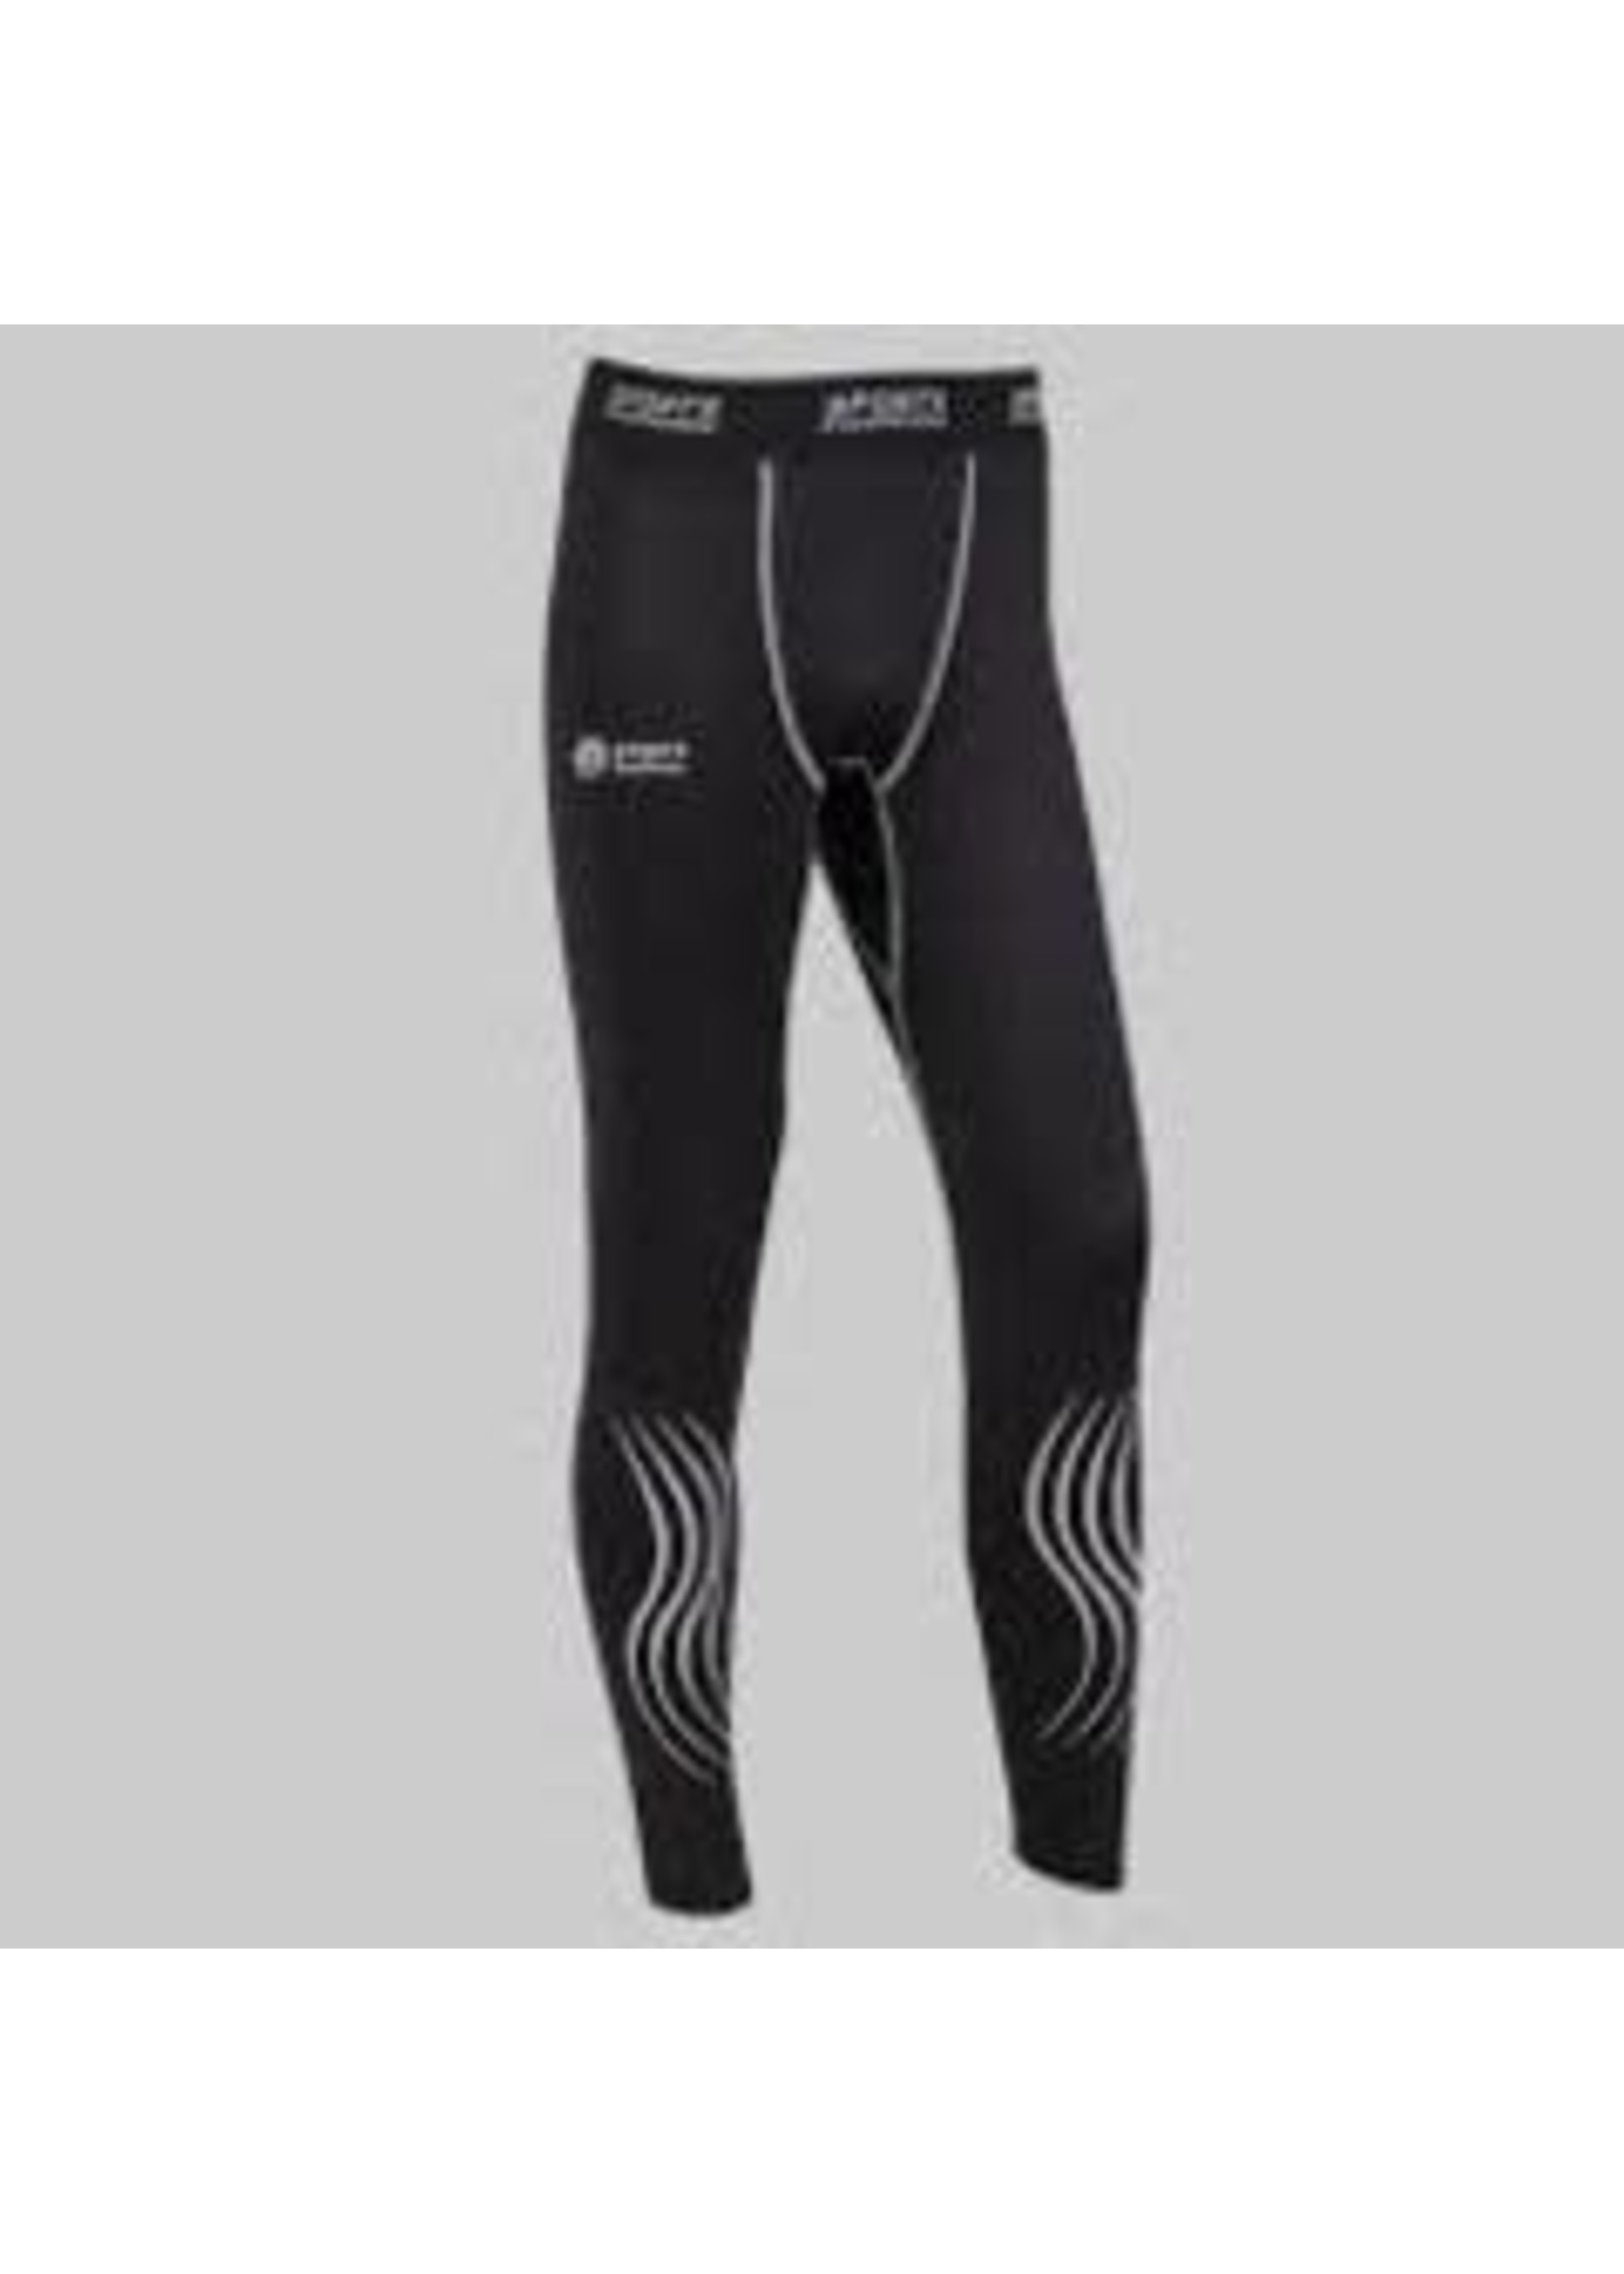 SPORT EXCELLENCE SPORTS EXCELLENCE  COMPRESSION PANTS